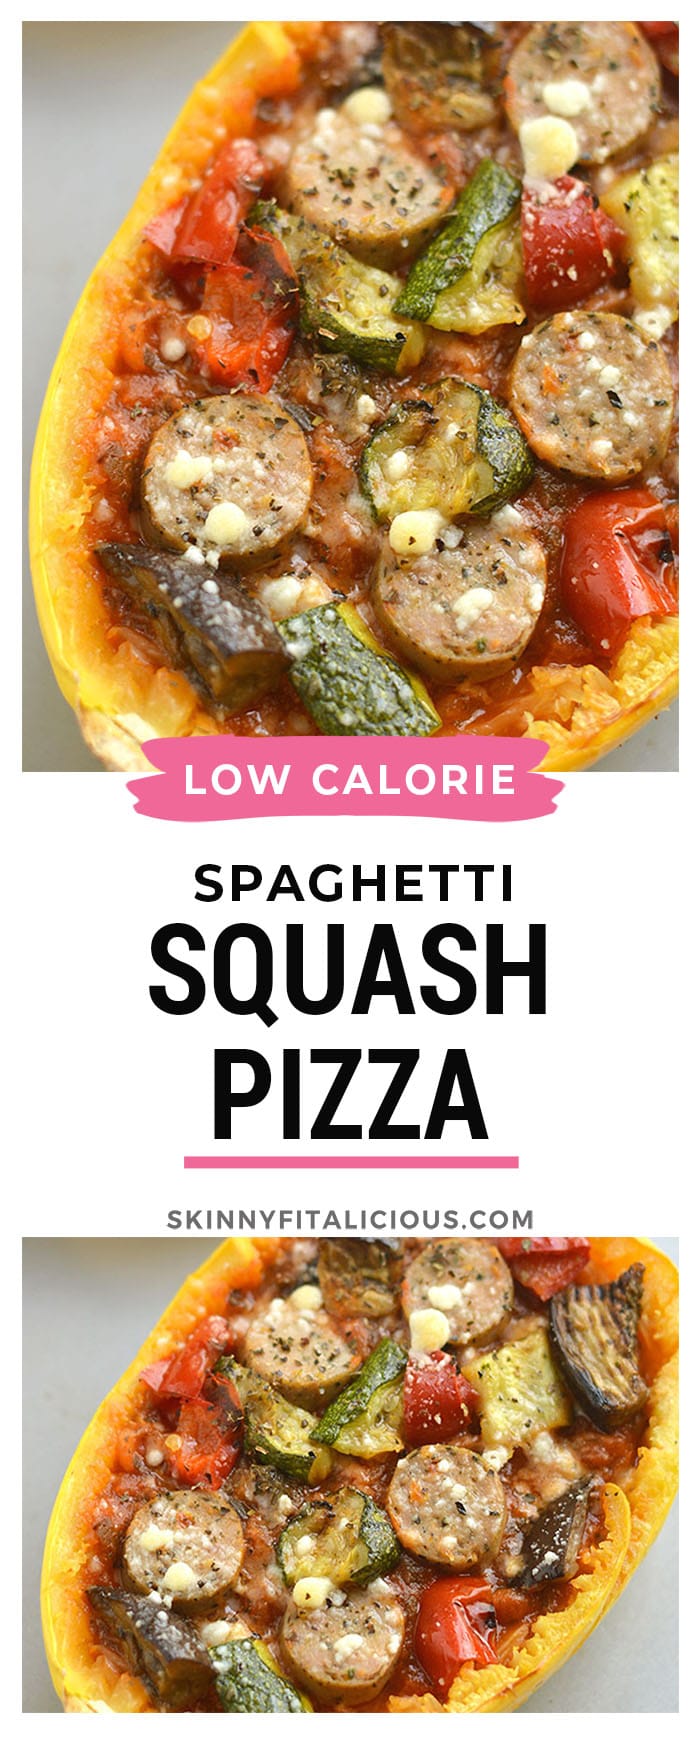 Spaghetti Squash Pizza! Customize with your favorite pizza toppings for an easy to make meal that's low carb, filling and delicious! Gluten Free + Low Calorie